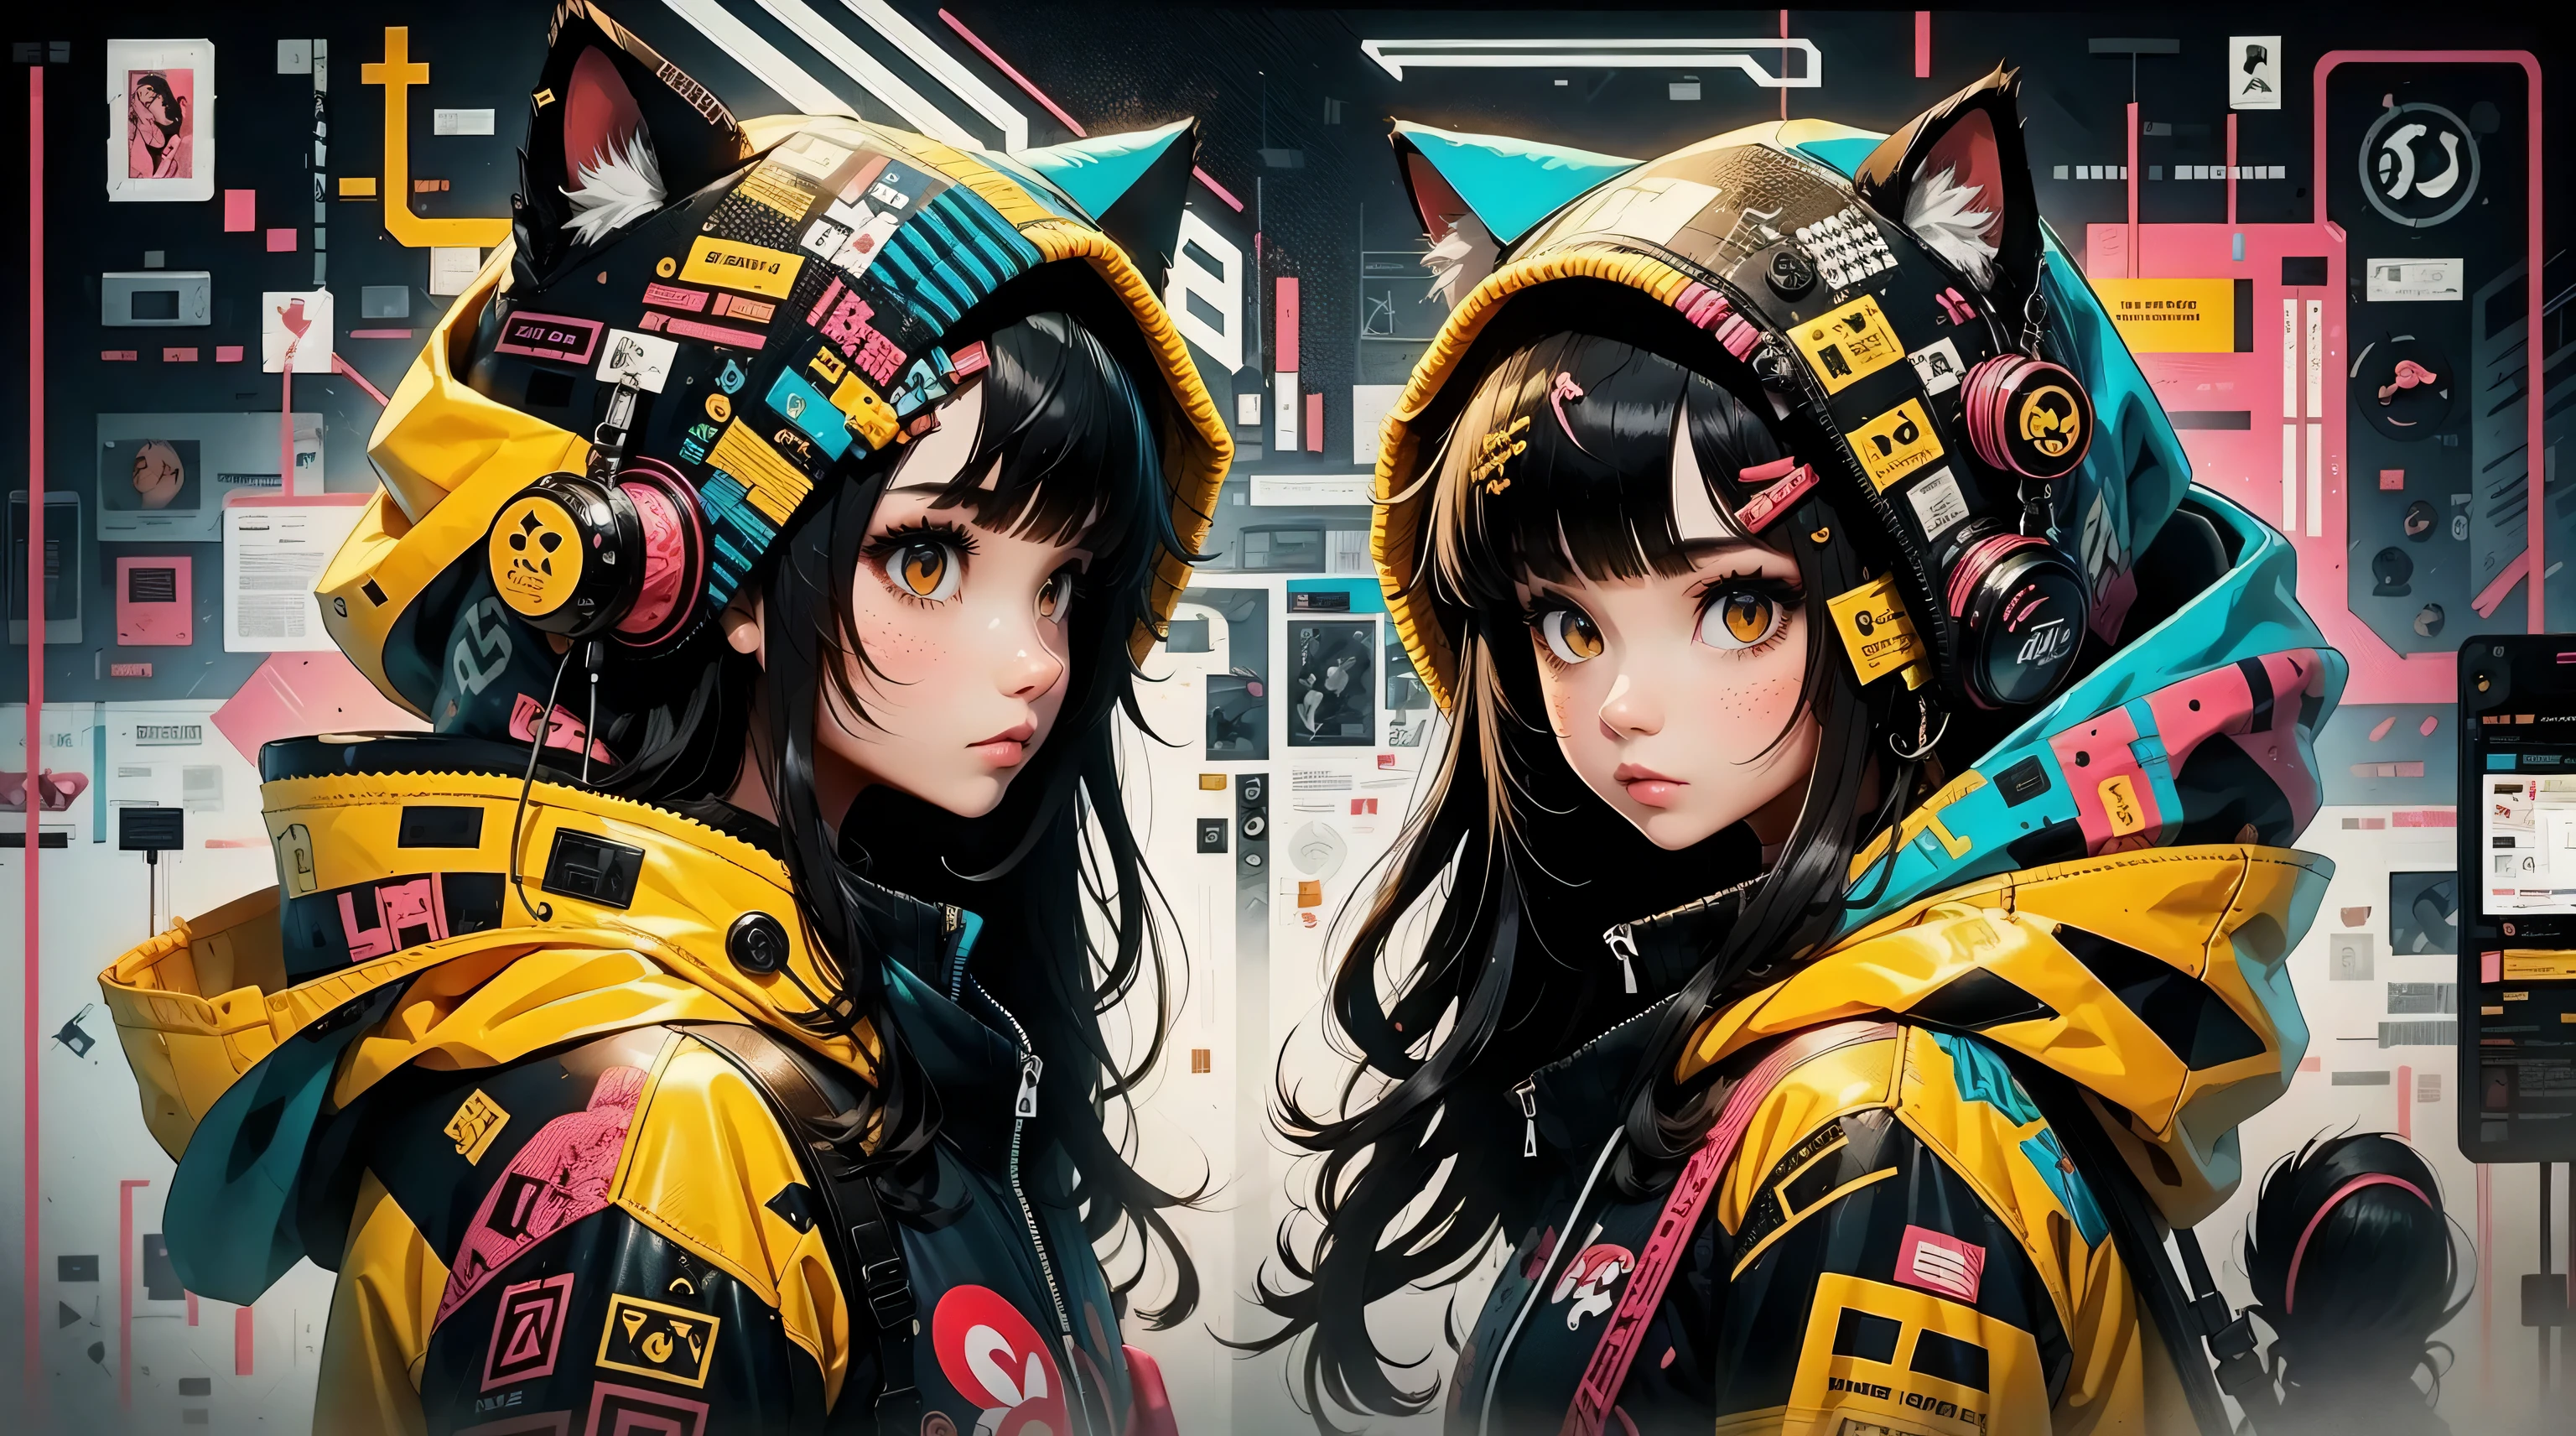 anime girl with black hair and a cat hat, anime style illustration, moe artstyle, wallpaper 8 k, digital illustration, beautiful catgirl, she wears a hoodie with animal ears and technowear technology, futuristic fashion in black and holographic colors, many details and buttons on it, cables coming out of the sleeves, the background is that of a  pattern with cat motifs and paws